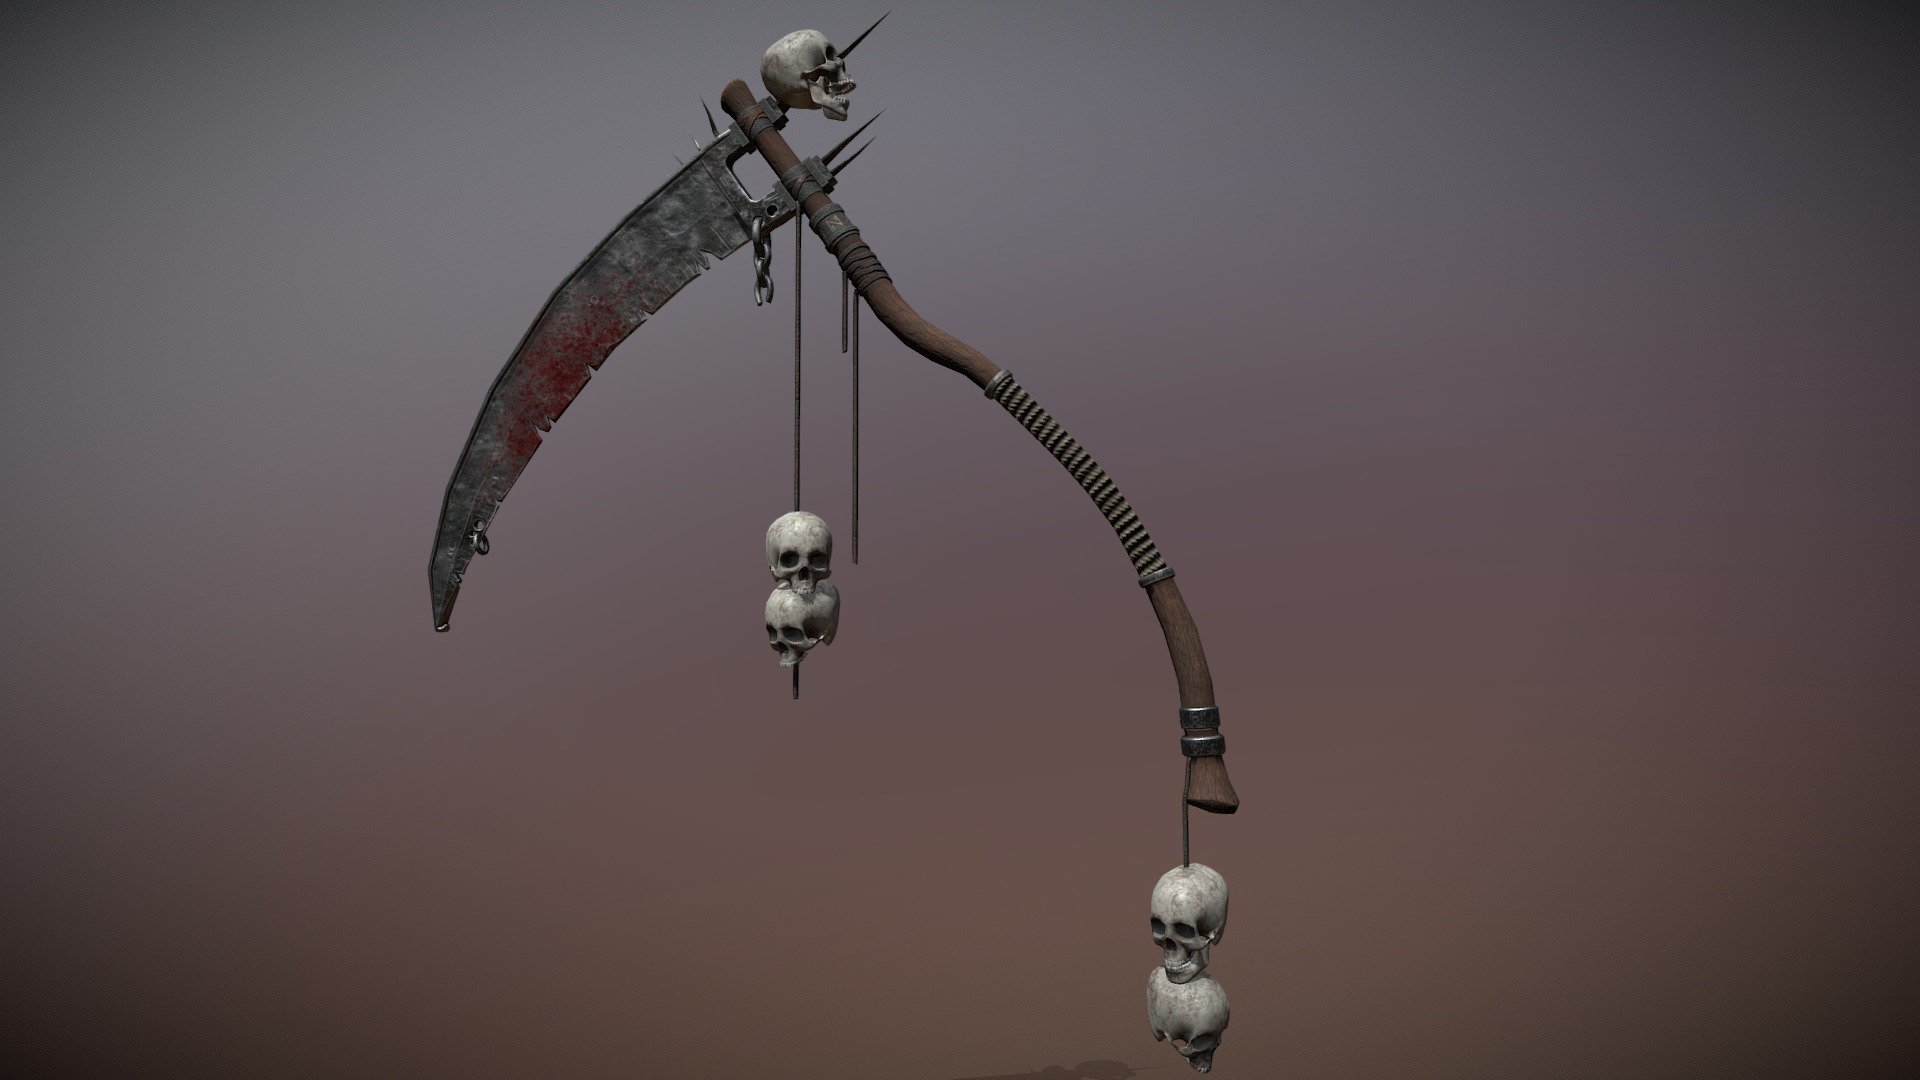 Model in maya
High Poly in Zbrush
Texture in Substance Painter - The Dark Scythe - 3D model by Math.Fry (@M.Frydman) 3d model